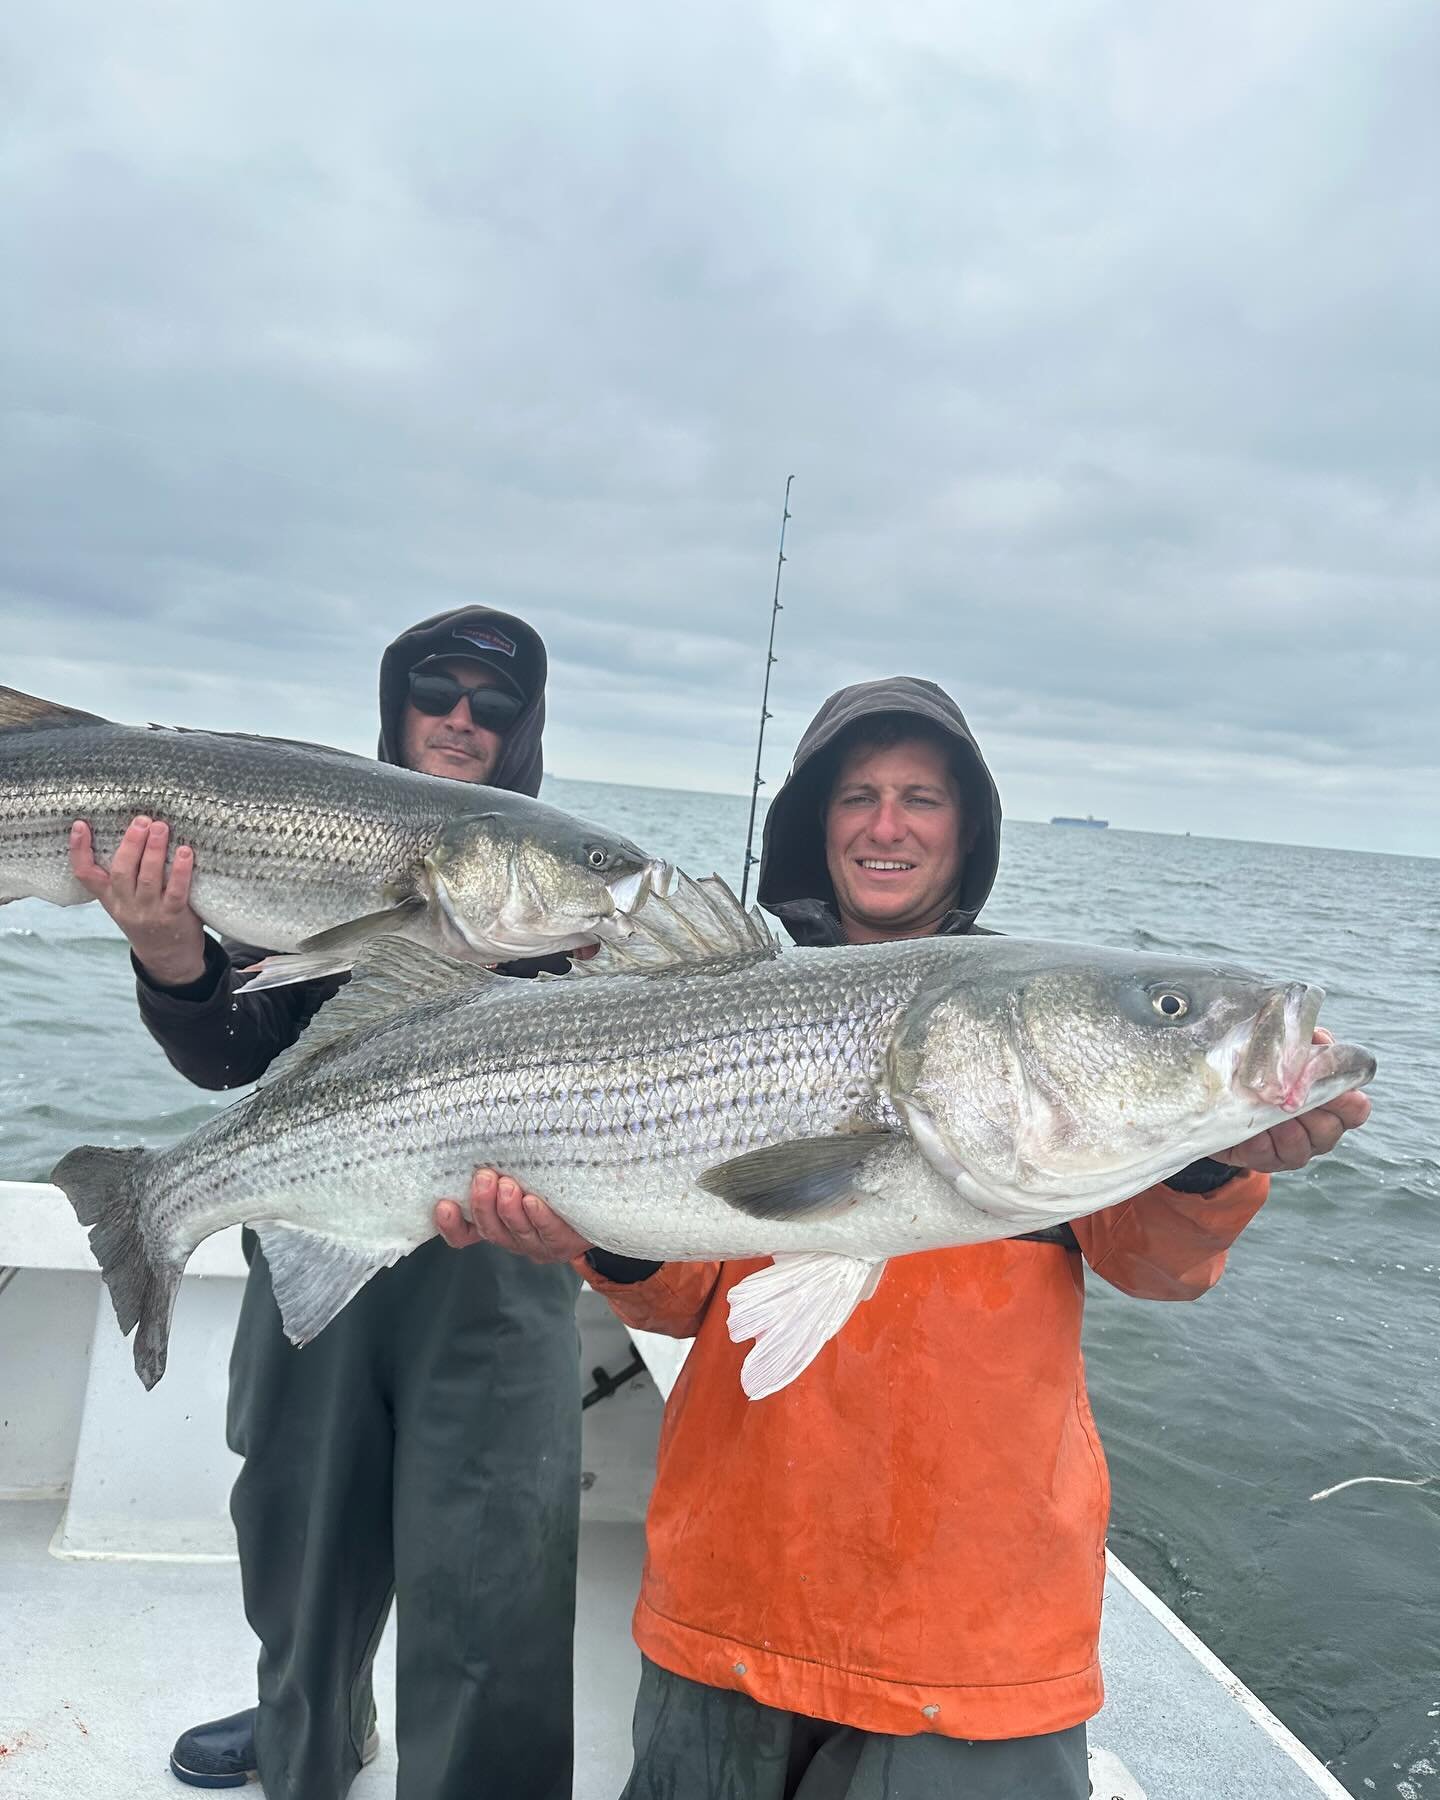 Exceptional fishing the last 2 days on snakes and bunks!

☀️Call/Text 646 784 2336 to book a trip 
☀️$990+Tip 6 hour Striped Bass 
☀️$165 + Tip open boat 

#stripedbassfishing #jamaicabayfishing #raritanbayfishing #nycfishingcharters #brooklynfishing